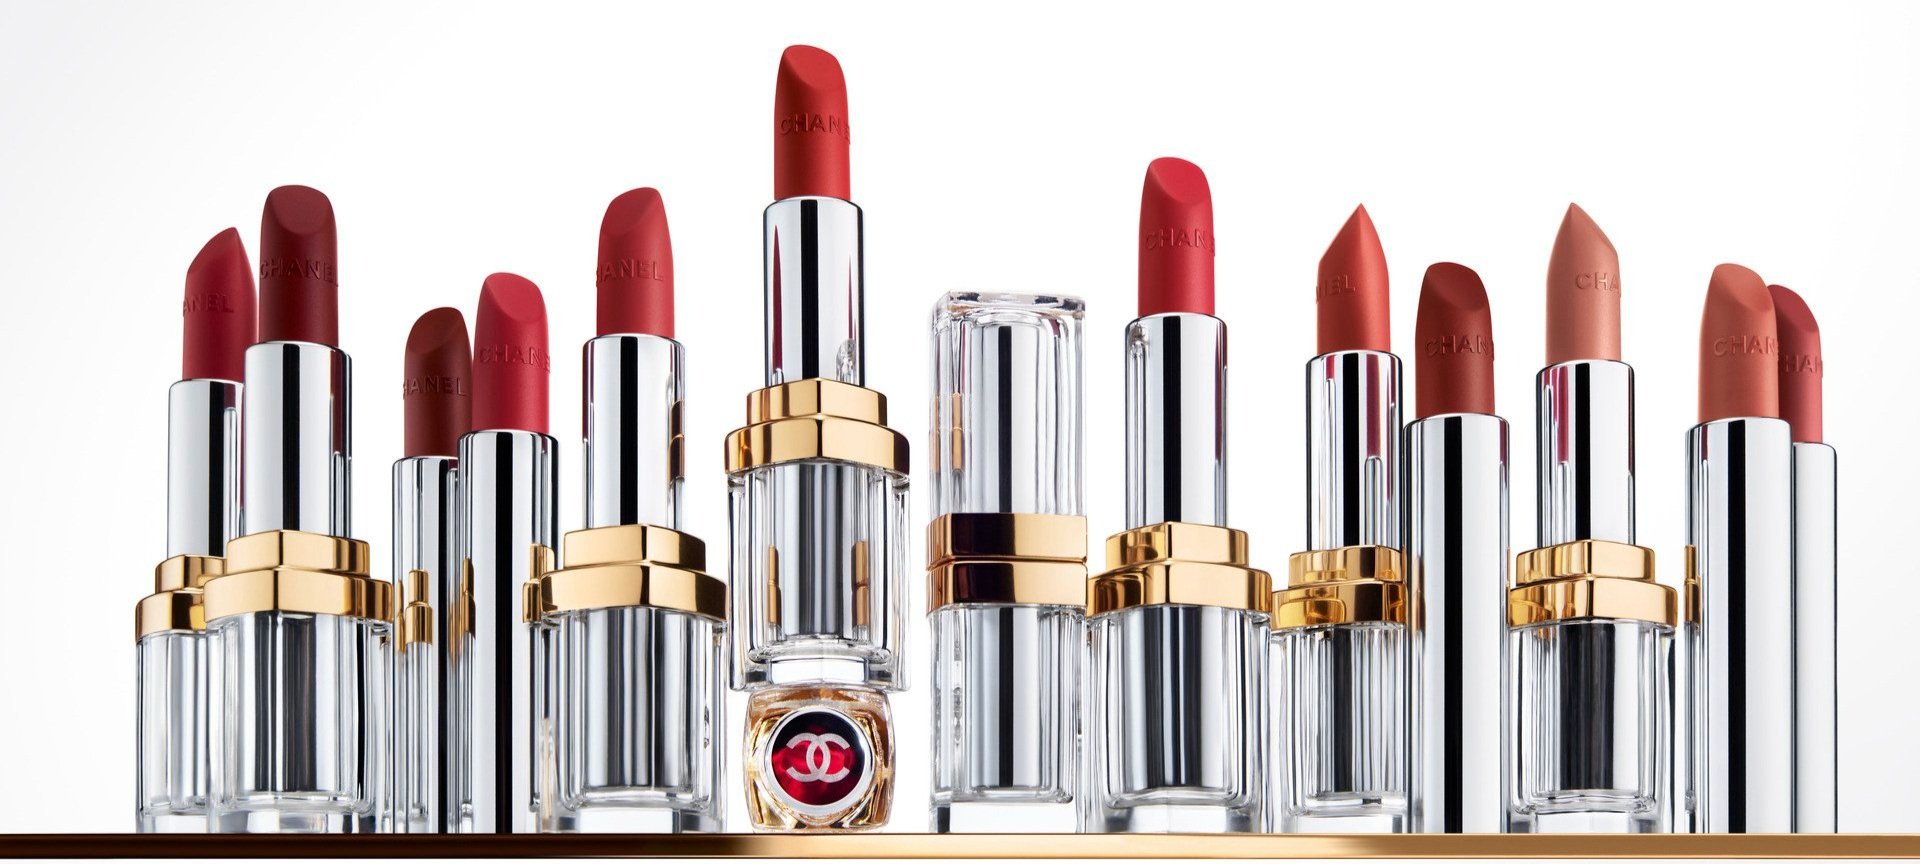 Chanel Rouge Coco relaunch 2015  Specktra: The online community for beauty